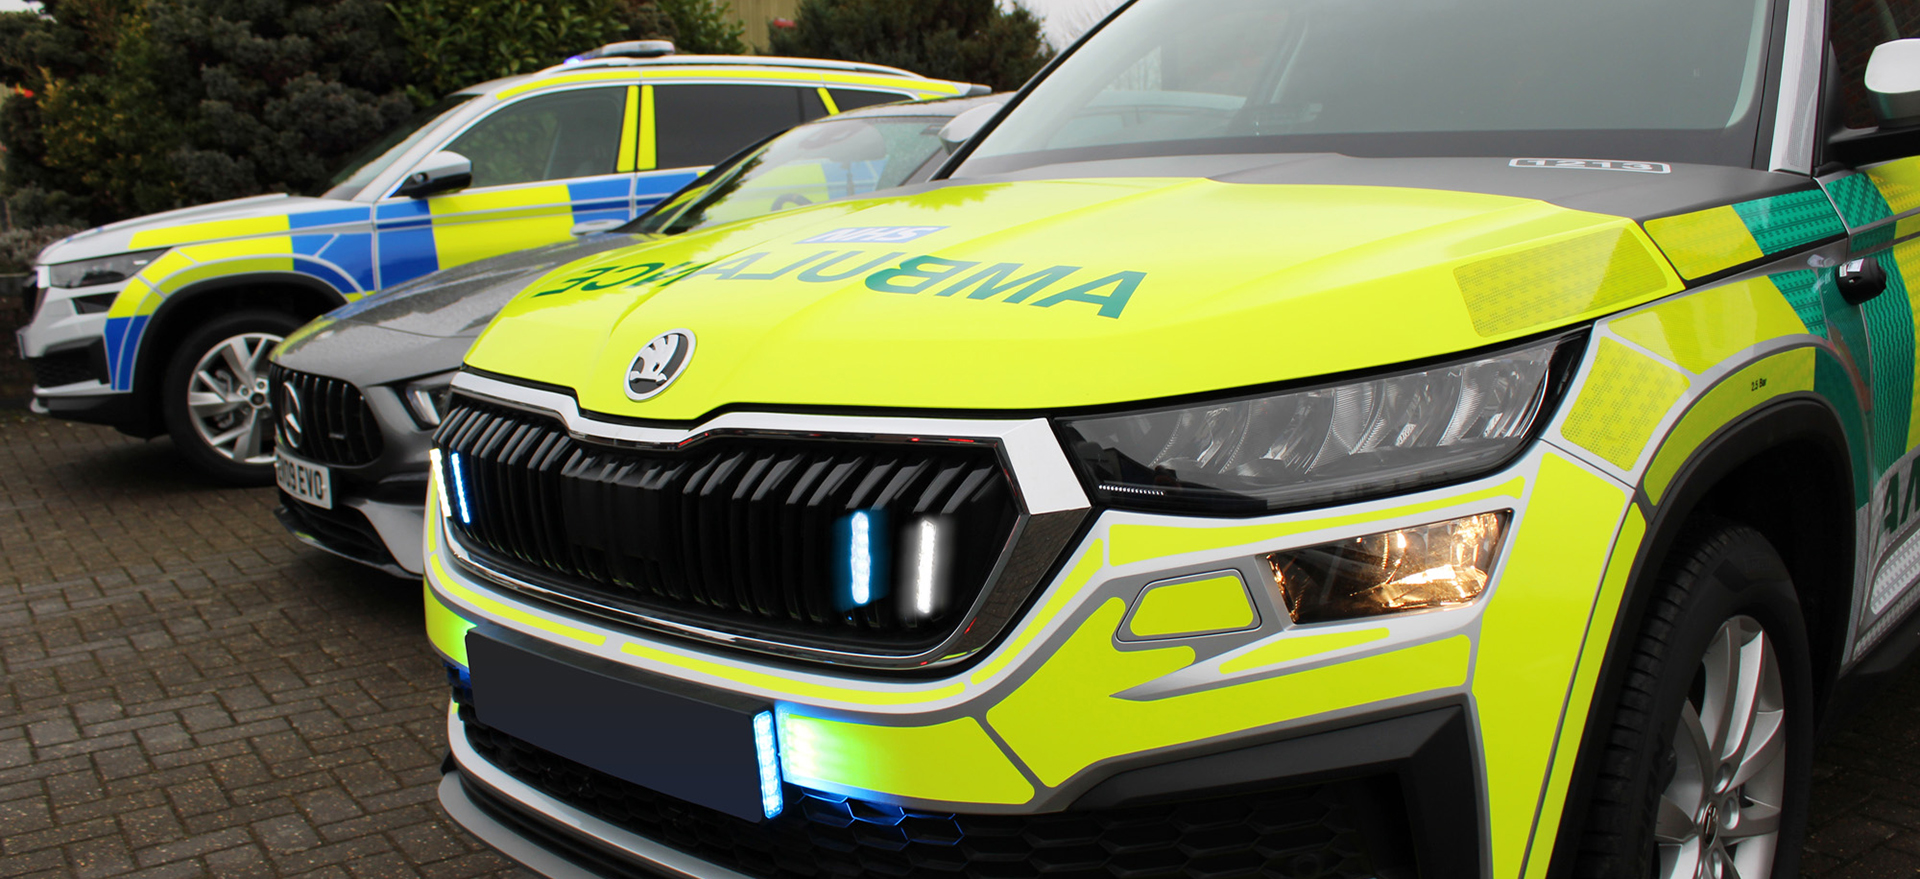 Close up of Skoda Kodiaq with Ambulance Livery featuring Blue and White Grille Lights and Stealth Reg Plate